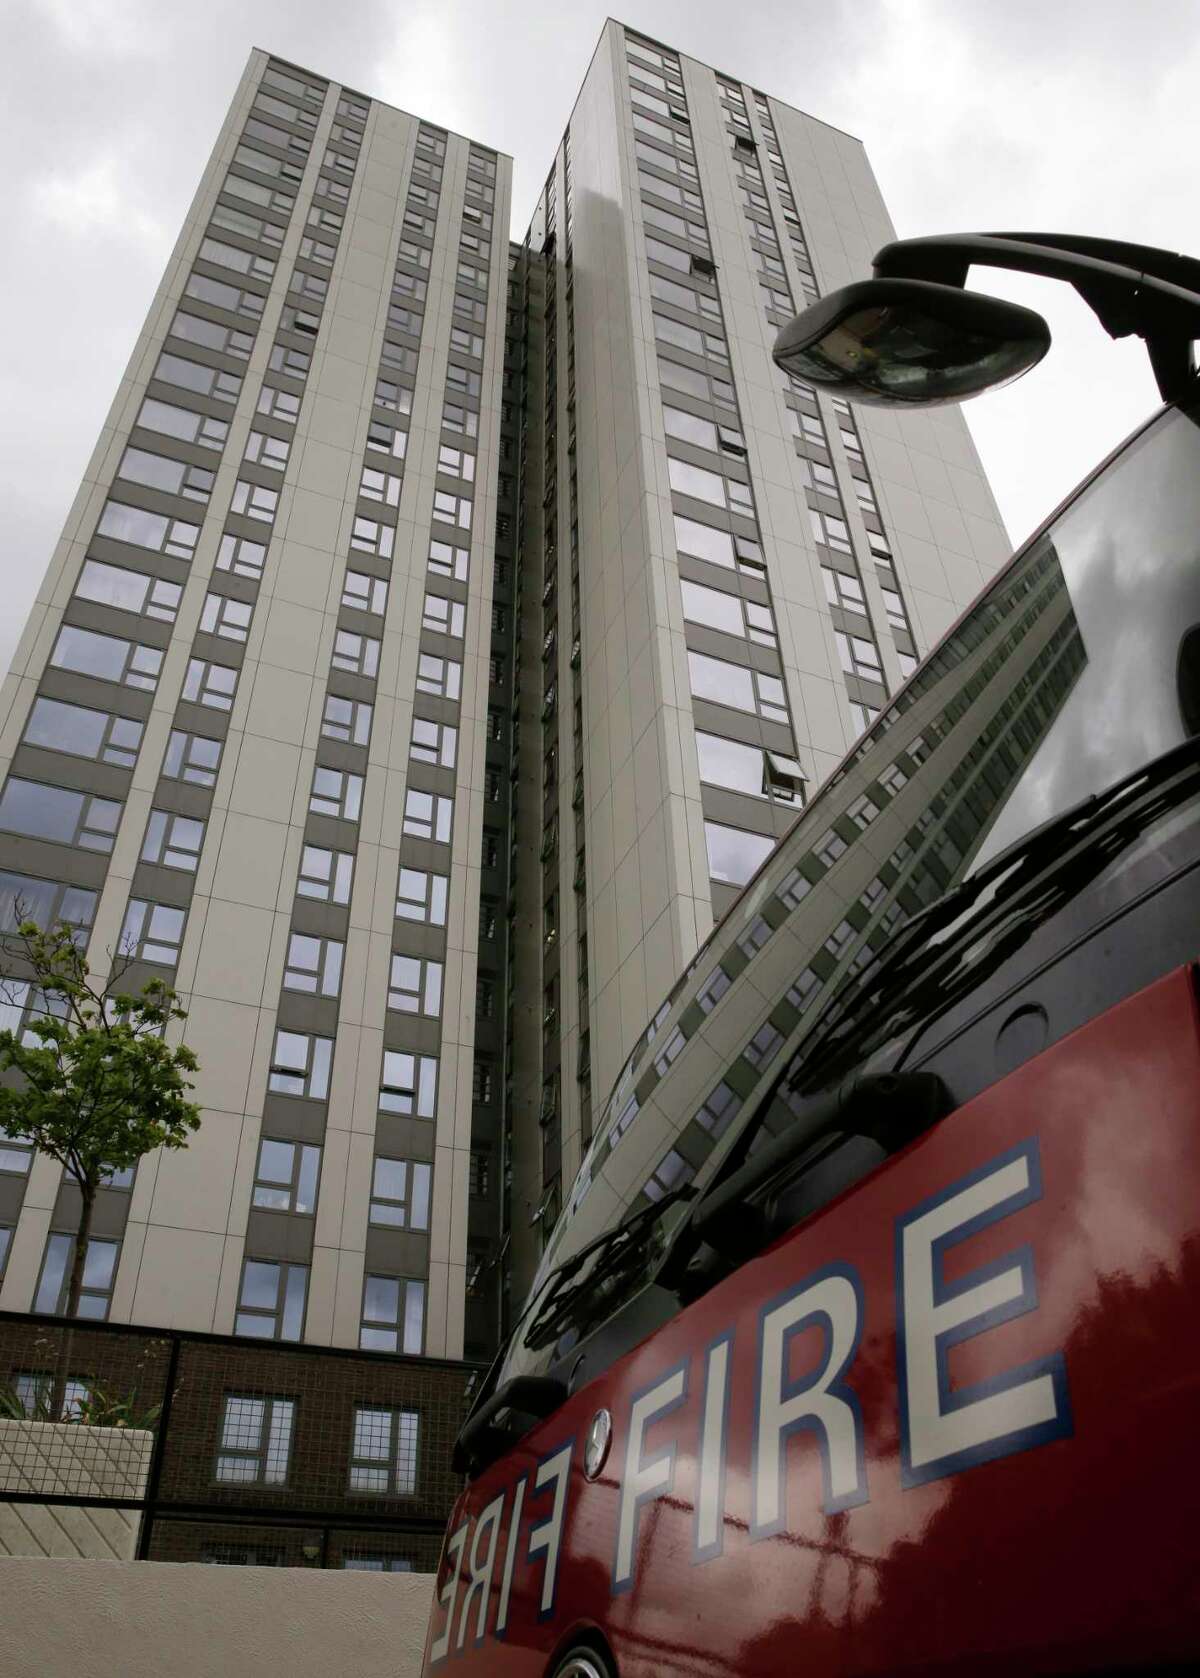 A fire engine is parked outside Burnham block, part of the Chalcots Estate in the borough of Camden, north London, Saturday June 24, 2017, after the local council evacuated some 650 homes overnight. The apartments were evacuated overnight after fire inspectors concluded that the buildings, in north London's Camden area, were unsafe because of problematic fire doors, gas pipe insulation, and external cladding similar to that blamed for the rapid spread of a fire that engulfed Grenfell Tower on June 14. (AP Photo/Alastair Grant) ORG XMIT: LON175